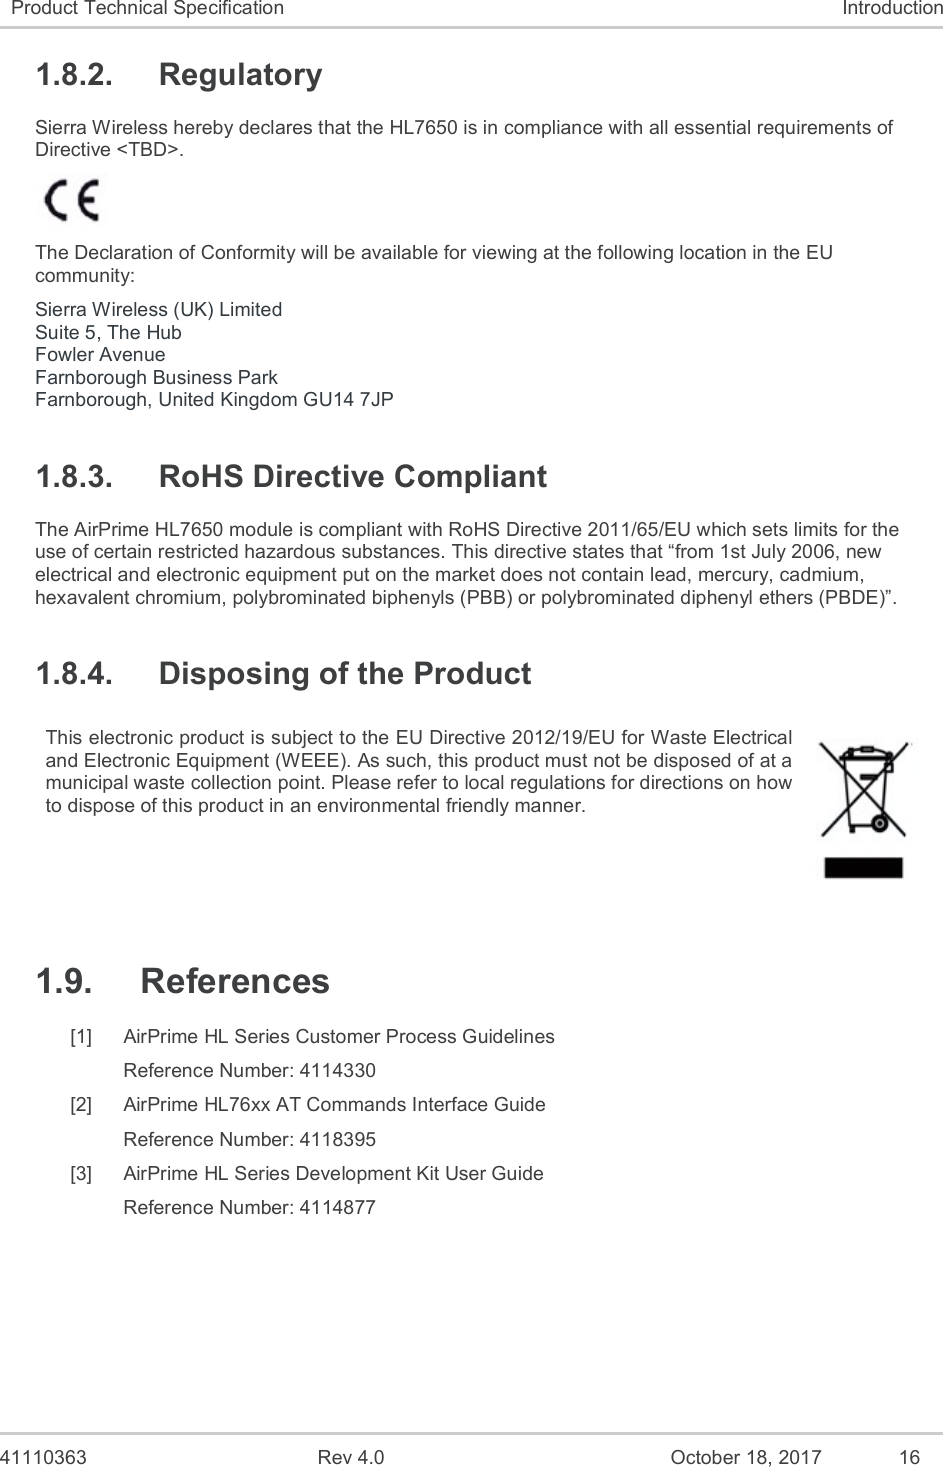   41110363  Rev 4.0  October 18, 2017  16 Product Technical Specification  Introduction 1.8.2.  Regulatory Sierra Wireless hereby declares that the HL7650 is in compliance with all essential requirements of Directive &lt;TBD&gt;.   The Declaration of Conformity will be available for viewing at the following location in the EU community: Sierra Wireless (UK) Limited Suite 5, The Hub Fowler Avenue Farnborough Business Park Farnborough, United Kingdom GU14 7JP 1.8.3.  RoHS Directive Compliant The AirPrime HL7650 module is compliant with RoHS Directive 2011/65/EU which sets limits for the use of certain restricted hazardous substances. This directive states that “from 1st July 2006, new electrical and electronic equipment put on the market does not contain lead, mercury, cadmium, hexavalent chromium, polybrominated biphenyls (PBB) or polybrominated diphenyl ethers (PBDE)”. 1.8.4.  Disposing of the Product This electronic product is subject to the EU Directive 2012/19/EU for Waste Electrical and Electronic Equipment (WEEE). As such, this product must not be disposed of at a municipal waste collection point. Please refer to local regulations for directions on how to dispose of this product in an environmental friendly manner.  1.9.  References [1]  AirPrime HL Series Customer Process Guidelines Reference Number: 4114330 [2]  AirPrime HL76xx AT Commands Interface Guide Reference Number: 4118395 [3]  AirPrime HL Series Development Kit User Guide Reference Number: 4114877  